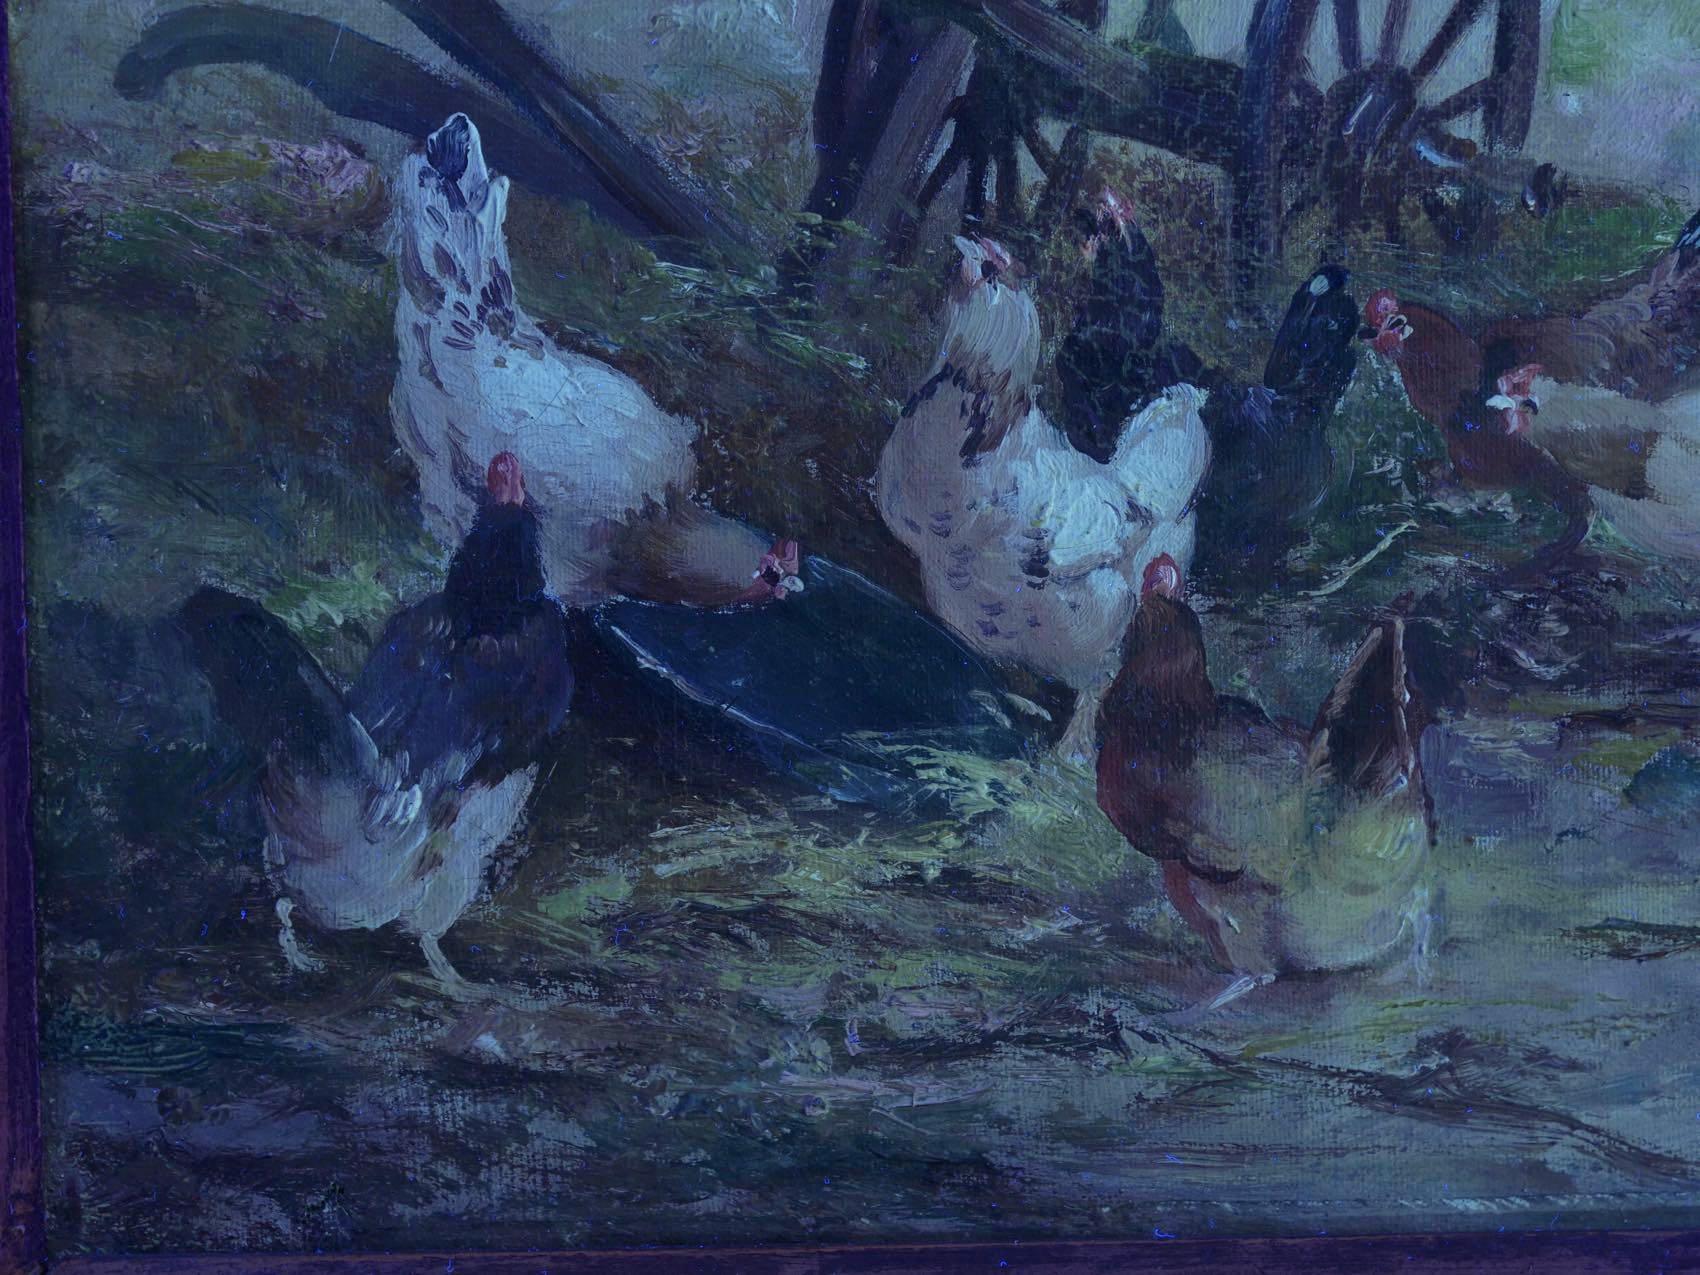 Barnyard Chickens Painting by Jacques van Coppenolle 12